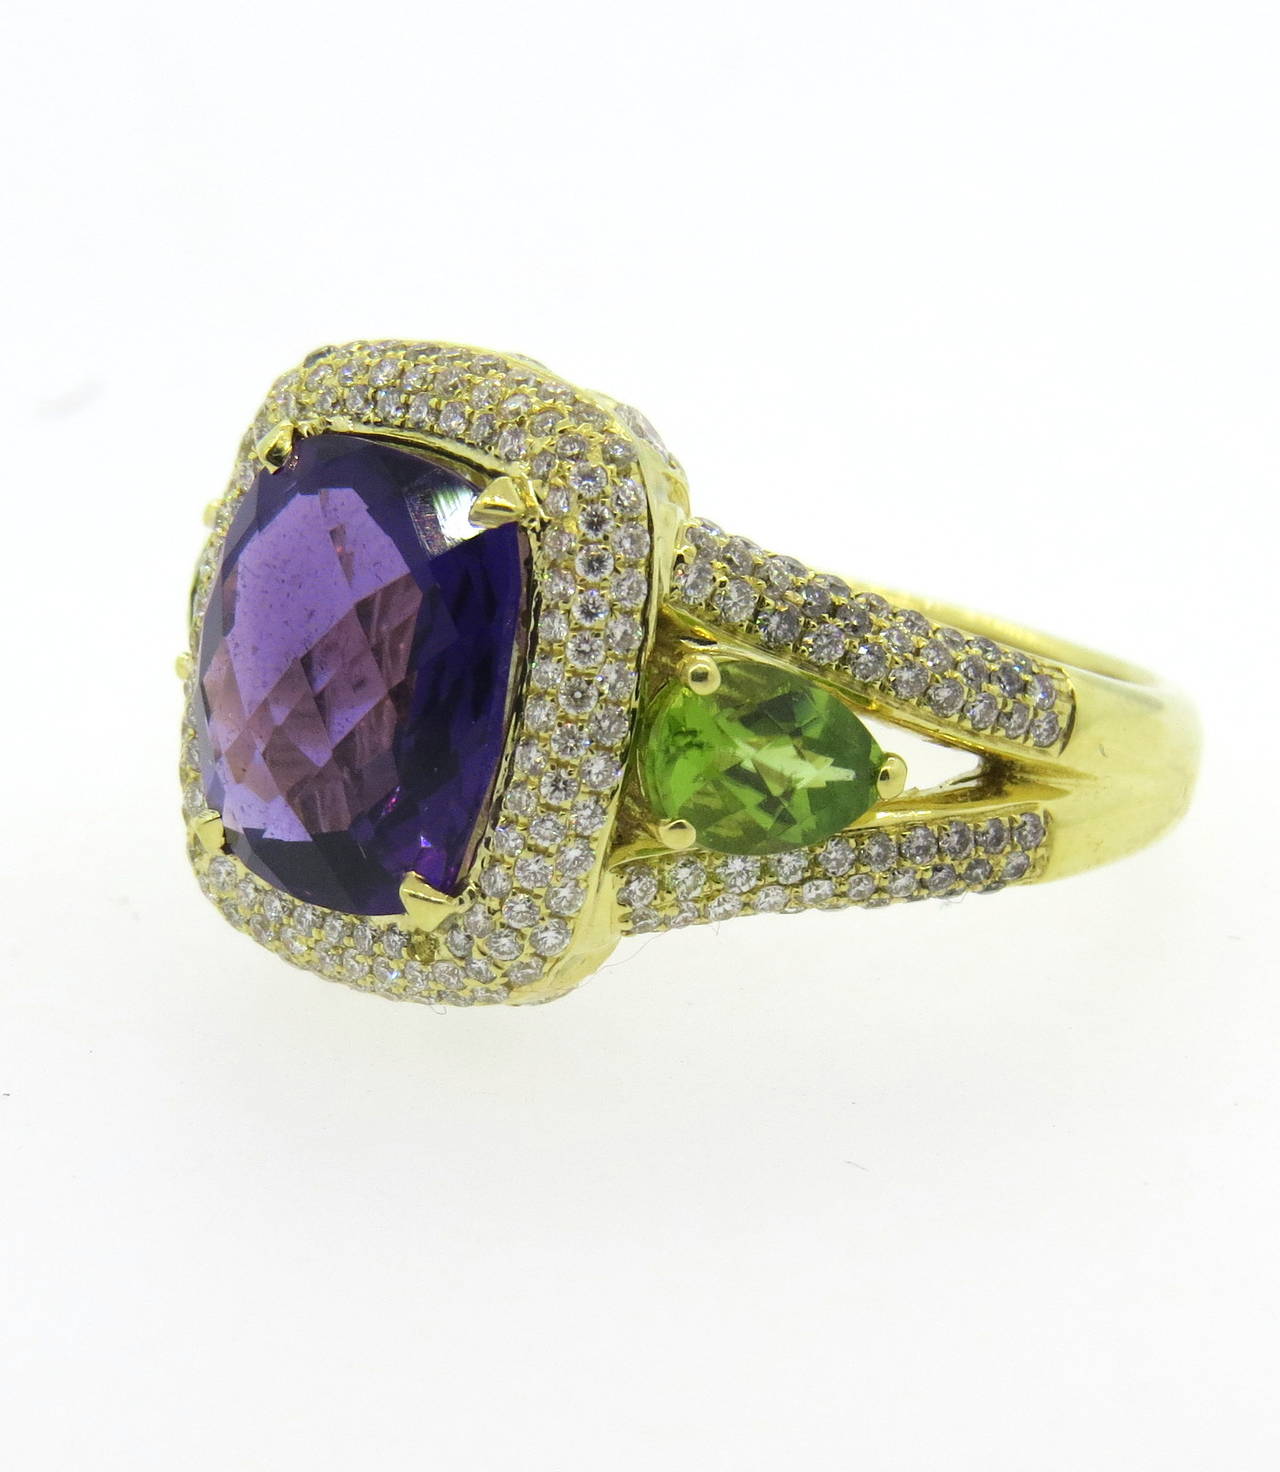 An 18k yellow gold ring set with diamonds (approx. 1.80cts), peridot (approx. 0.80ct) and amethyst (approx. 3.50ct).  Crafted by Charles Krypell, the ring is a size 10 and weighs 13.4 grams.  Marked: Krypell, 750.